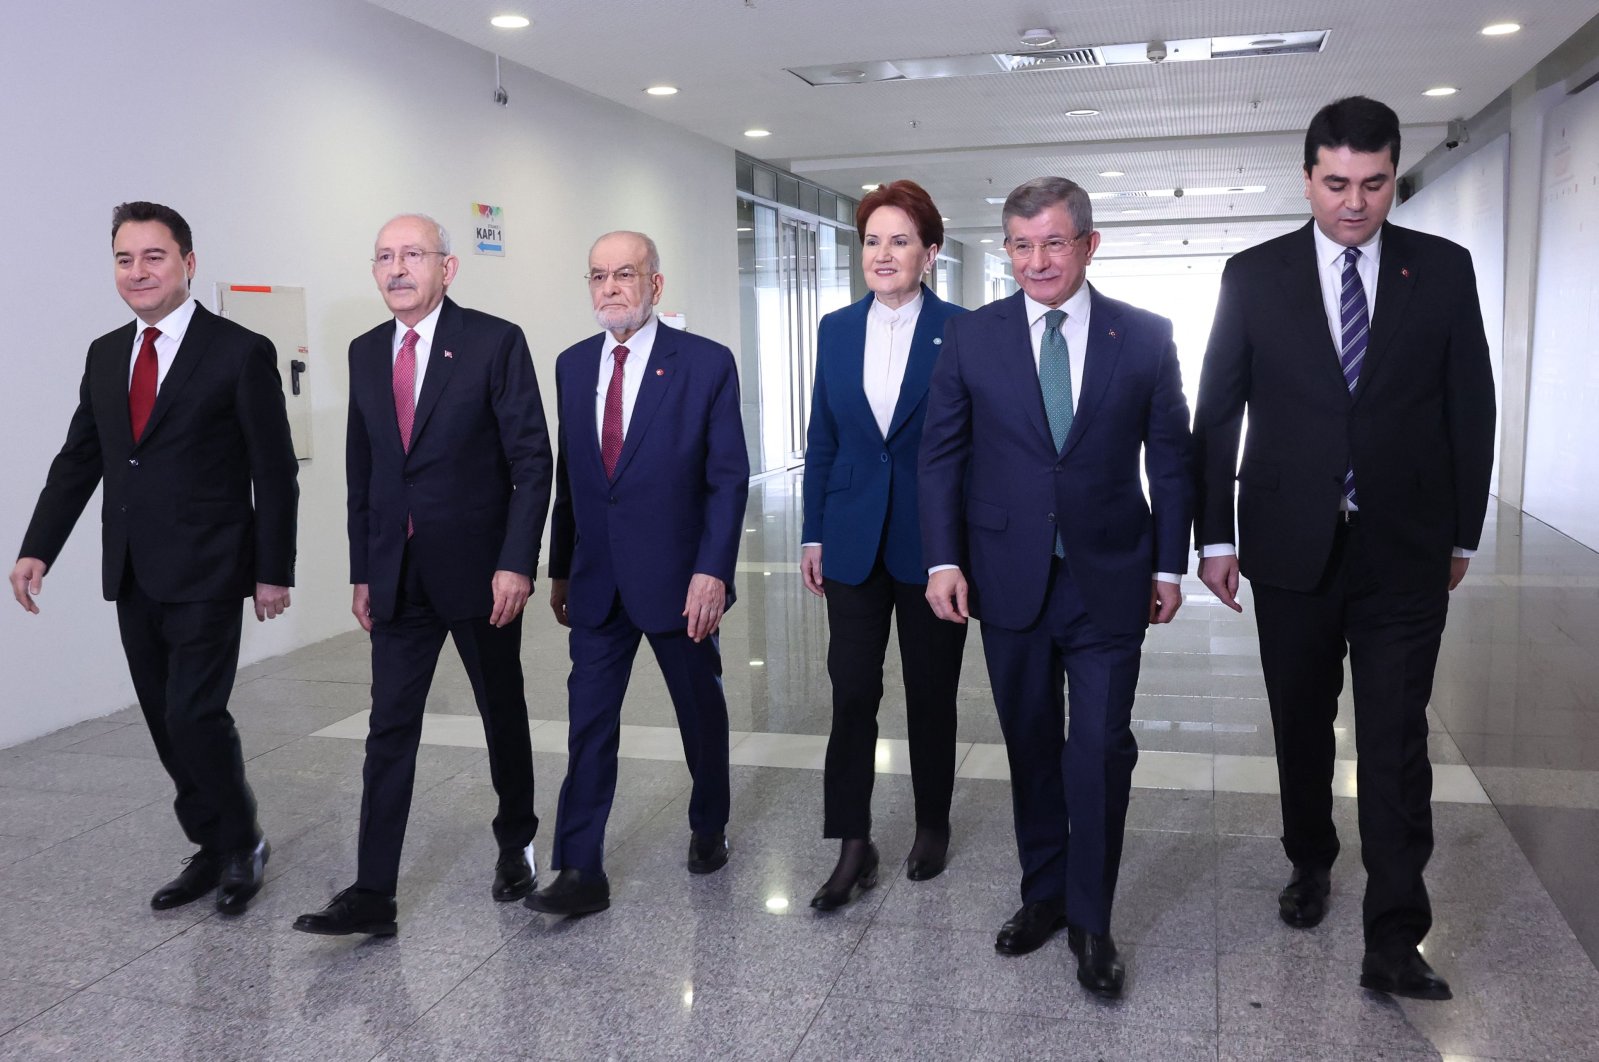  Heads of the six opposition parties making up the &quot;table for six&quot; arrive to present their program, in Ankara, Türkiye, Jan. 30, 2023. (AFP Photo)